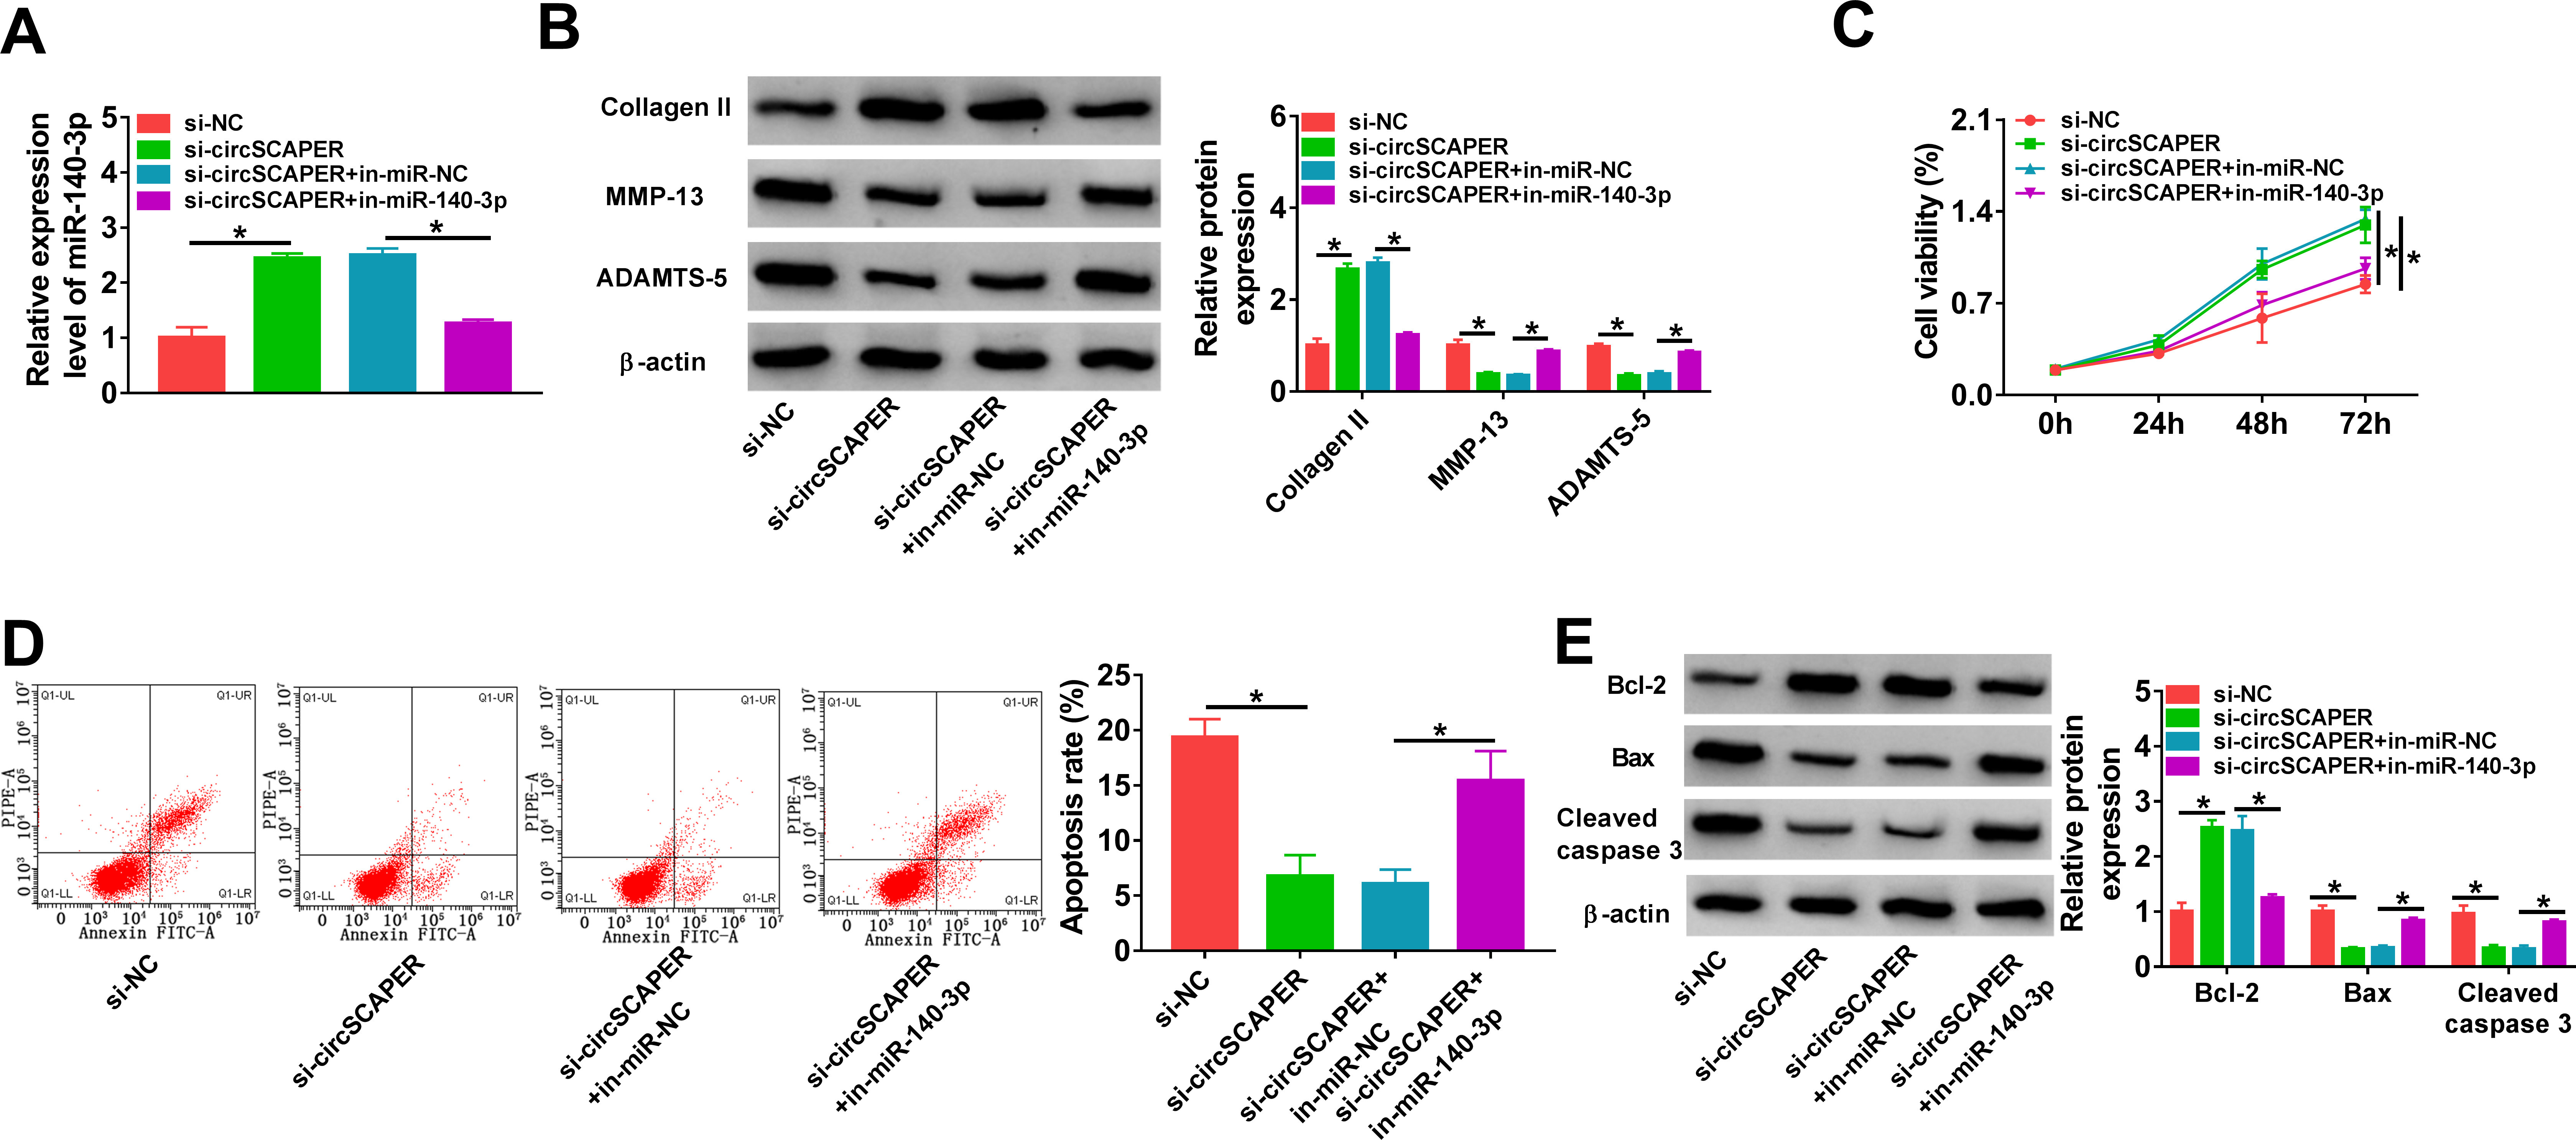 Fig. 4 
            CircSCAPER knockdown attenuates interleukin (IL)-1β-induced chondrocyte dysfunction via microRNA (miR)-140-3p. a) to e) C28/I2 cells were transfected with circSCAPER-specific small interfering RNA (siRNA) (si-circSCAPER), si-negative control (NC), si-circSCAPER+in-miR-NC, or si-circSCAPER+in-miR-140-3p, followed by treatment with IL-1β (10 ng/l) for 24 hours. a) Quantitative real-time polymerase chain reaction (qRT-PCR) analysis of miR-140-3p level in cells. b) Western blot analysis of matrix metallopeptidase 13 (MMP-13), a disintegrin and metalloproteinase with thrombospondin motifs (ADAMTS)-5, and collagen II protein levels in cells. c) Cell counting kit-8 (CCK-8) assay for cell proliferation. d) Flow cytometry for cell apoptosis. e) Western blot analysis of B-cell lymphoma-2 (Bcl-2), Bcl-2-associated X (Bax), and cleaved caspase 3 protein levels in cells. One-way analysis of variance (ANOVA), *p < 0.05. All of the experiments were performed in triplicate. NC, negative control.
          